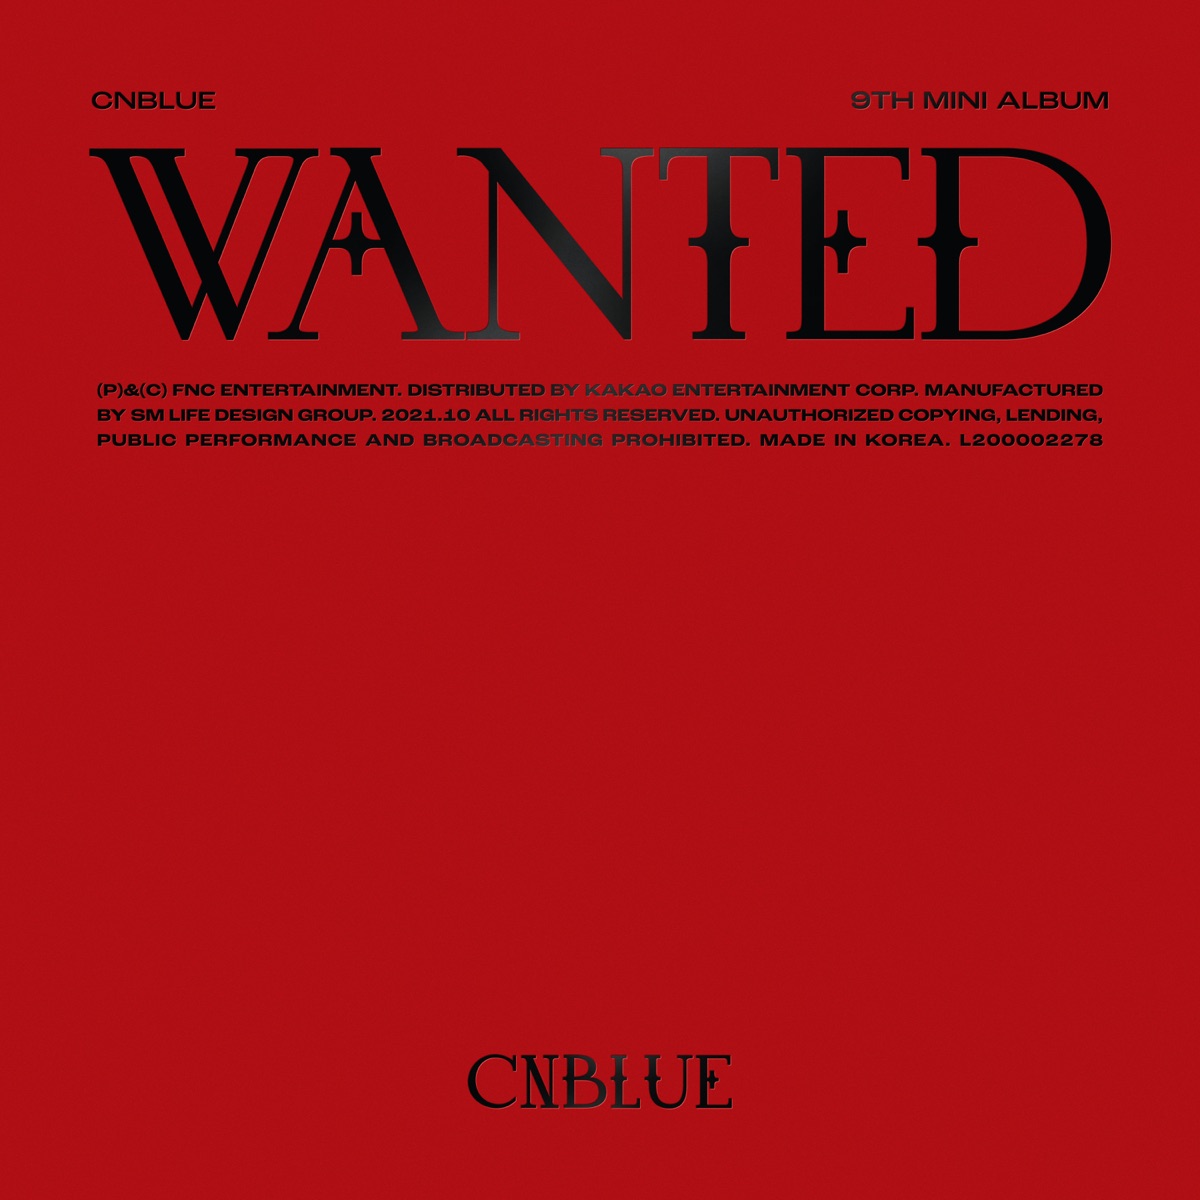 Cover for『CNBLUE - Love Cut』from the release『WANTED』